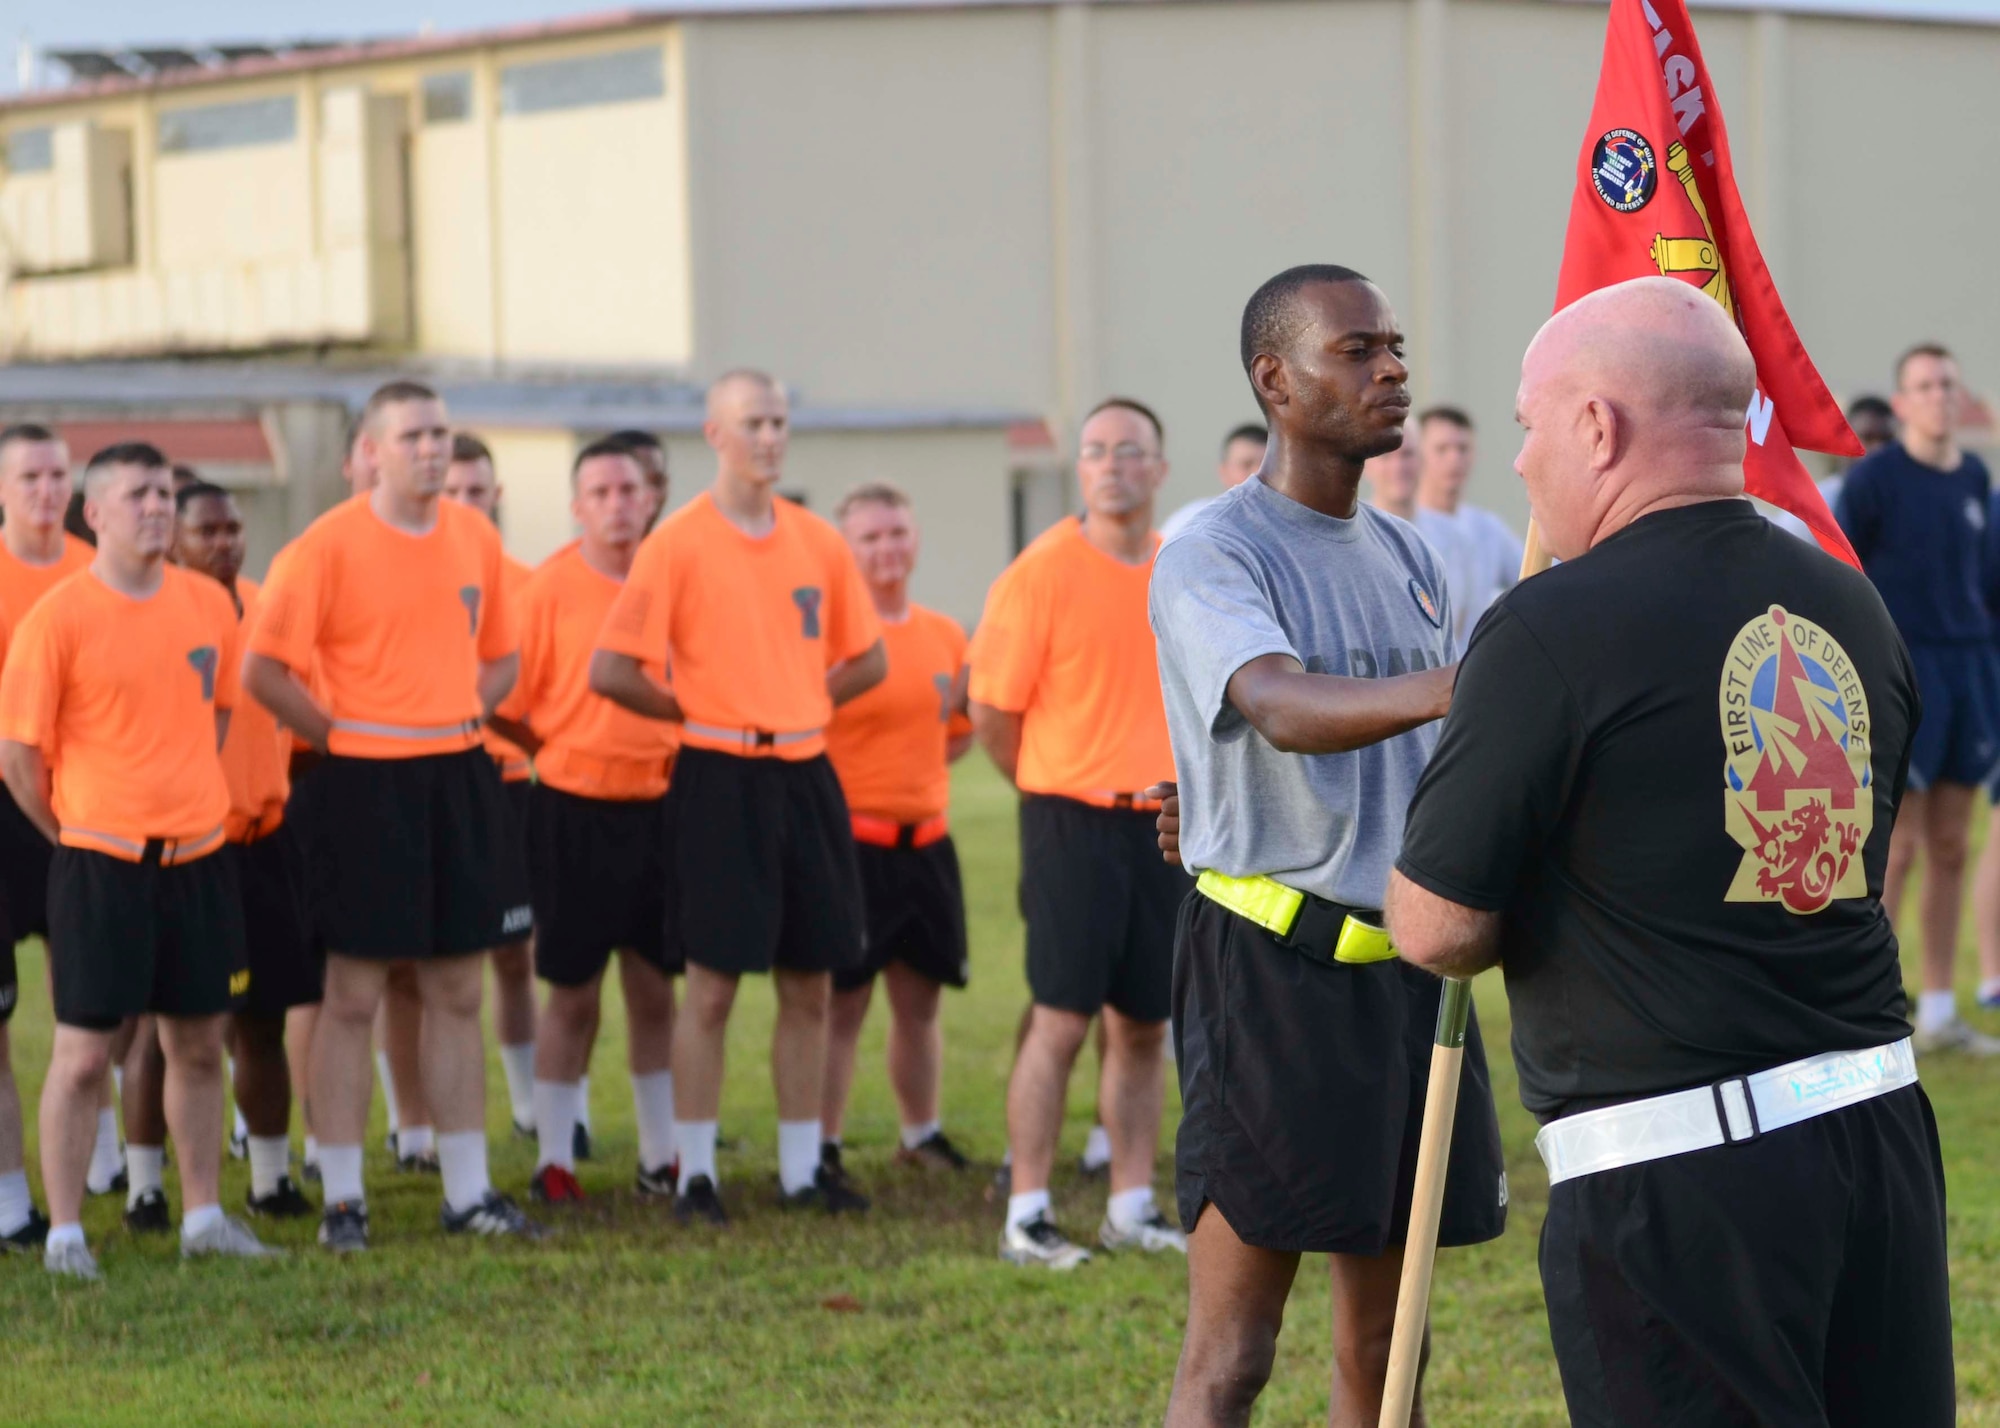 Lt. Col. Jefferey Slown, Task Force Talon commander, speaks to Soldiers and Airmen after a 3-mile esprit de corps run June 12, 2015, at Andersen Air Force Base, Guam.  The event was held in honor of the Army’s 240th Birthday. (U.S. Air Force photo by Airman 1st Class Alexa Ann Henderson/Released)